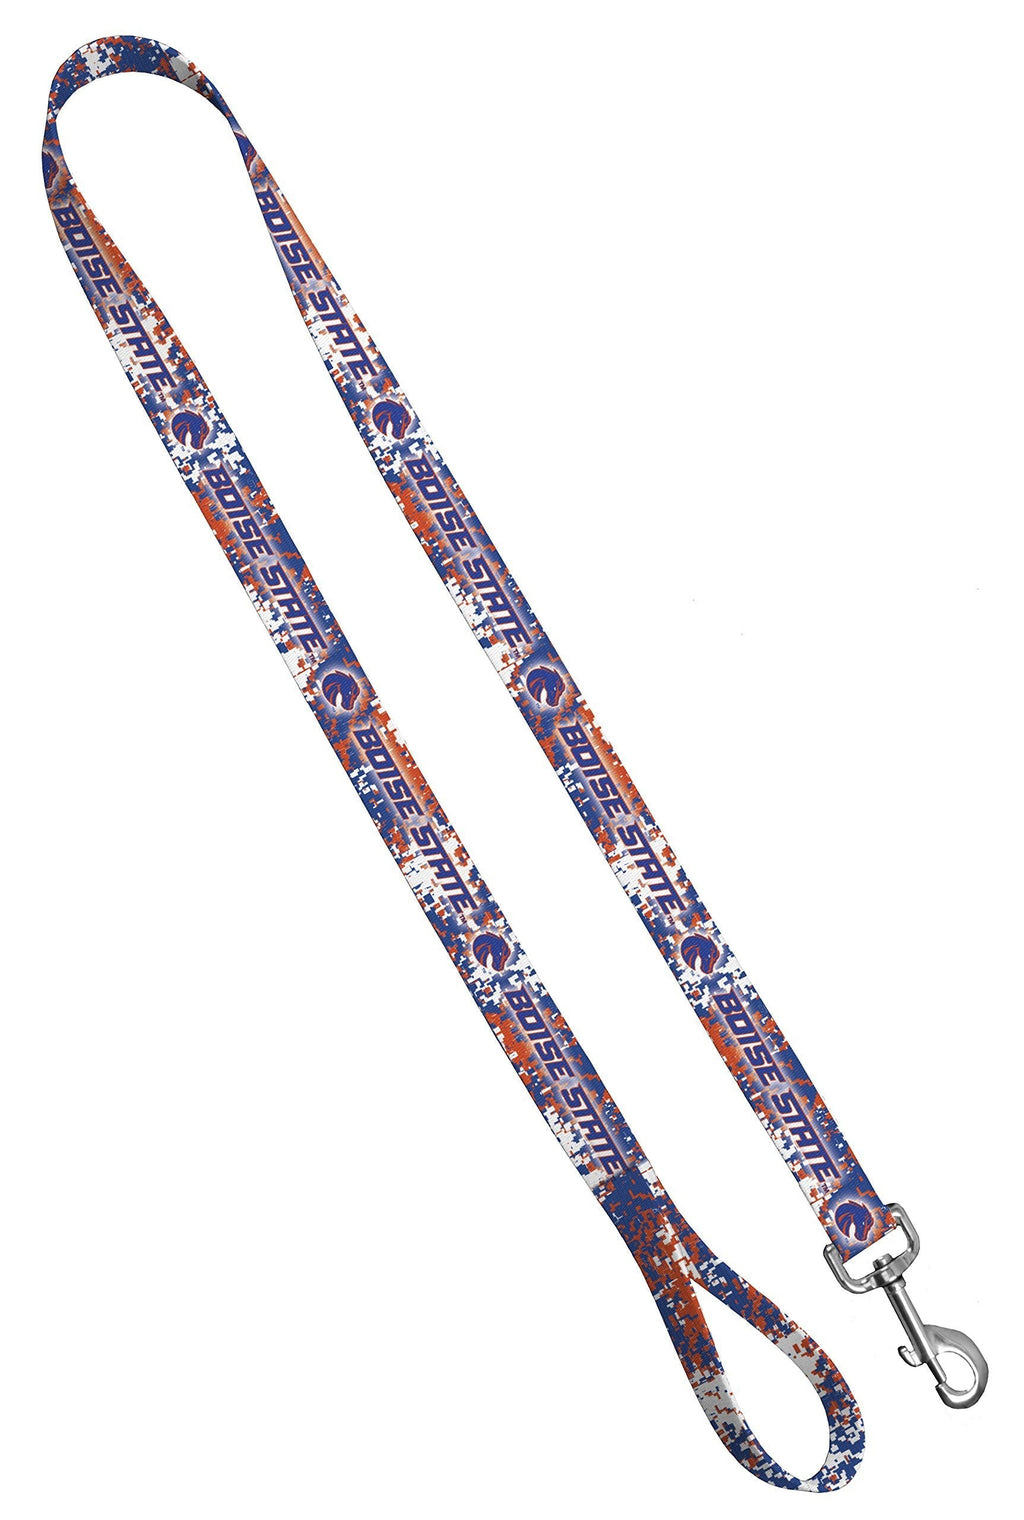 [Australia] - Boise State University Broncos Dog Collar Collection, Boise State Broncos Dog Collar and Leash, Made in The USA, Digi Bronco Print, Wide Range of Sizes for All Dogs Leash - 3/4" x 4' 